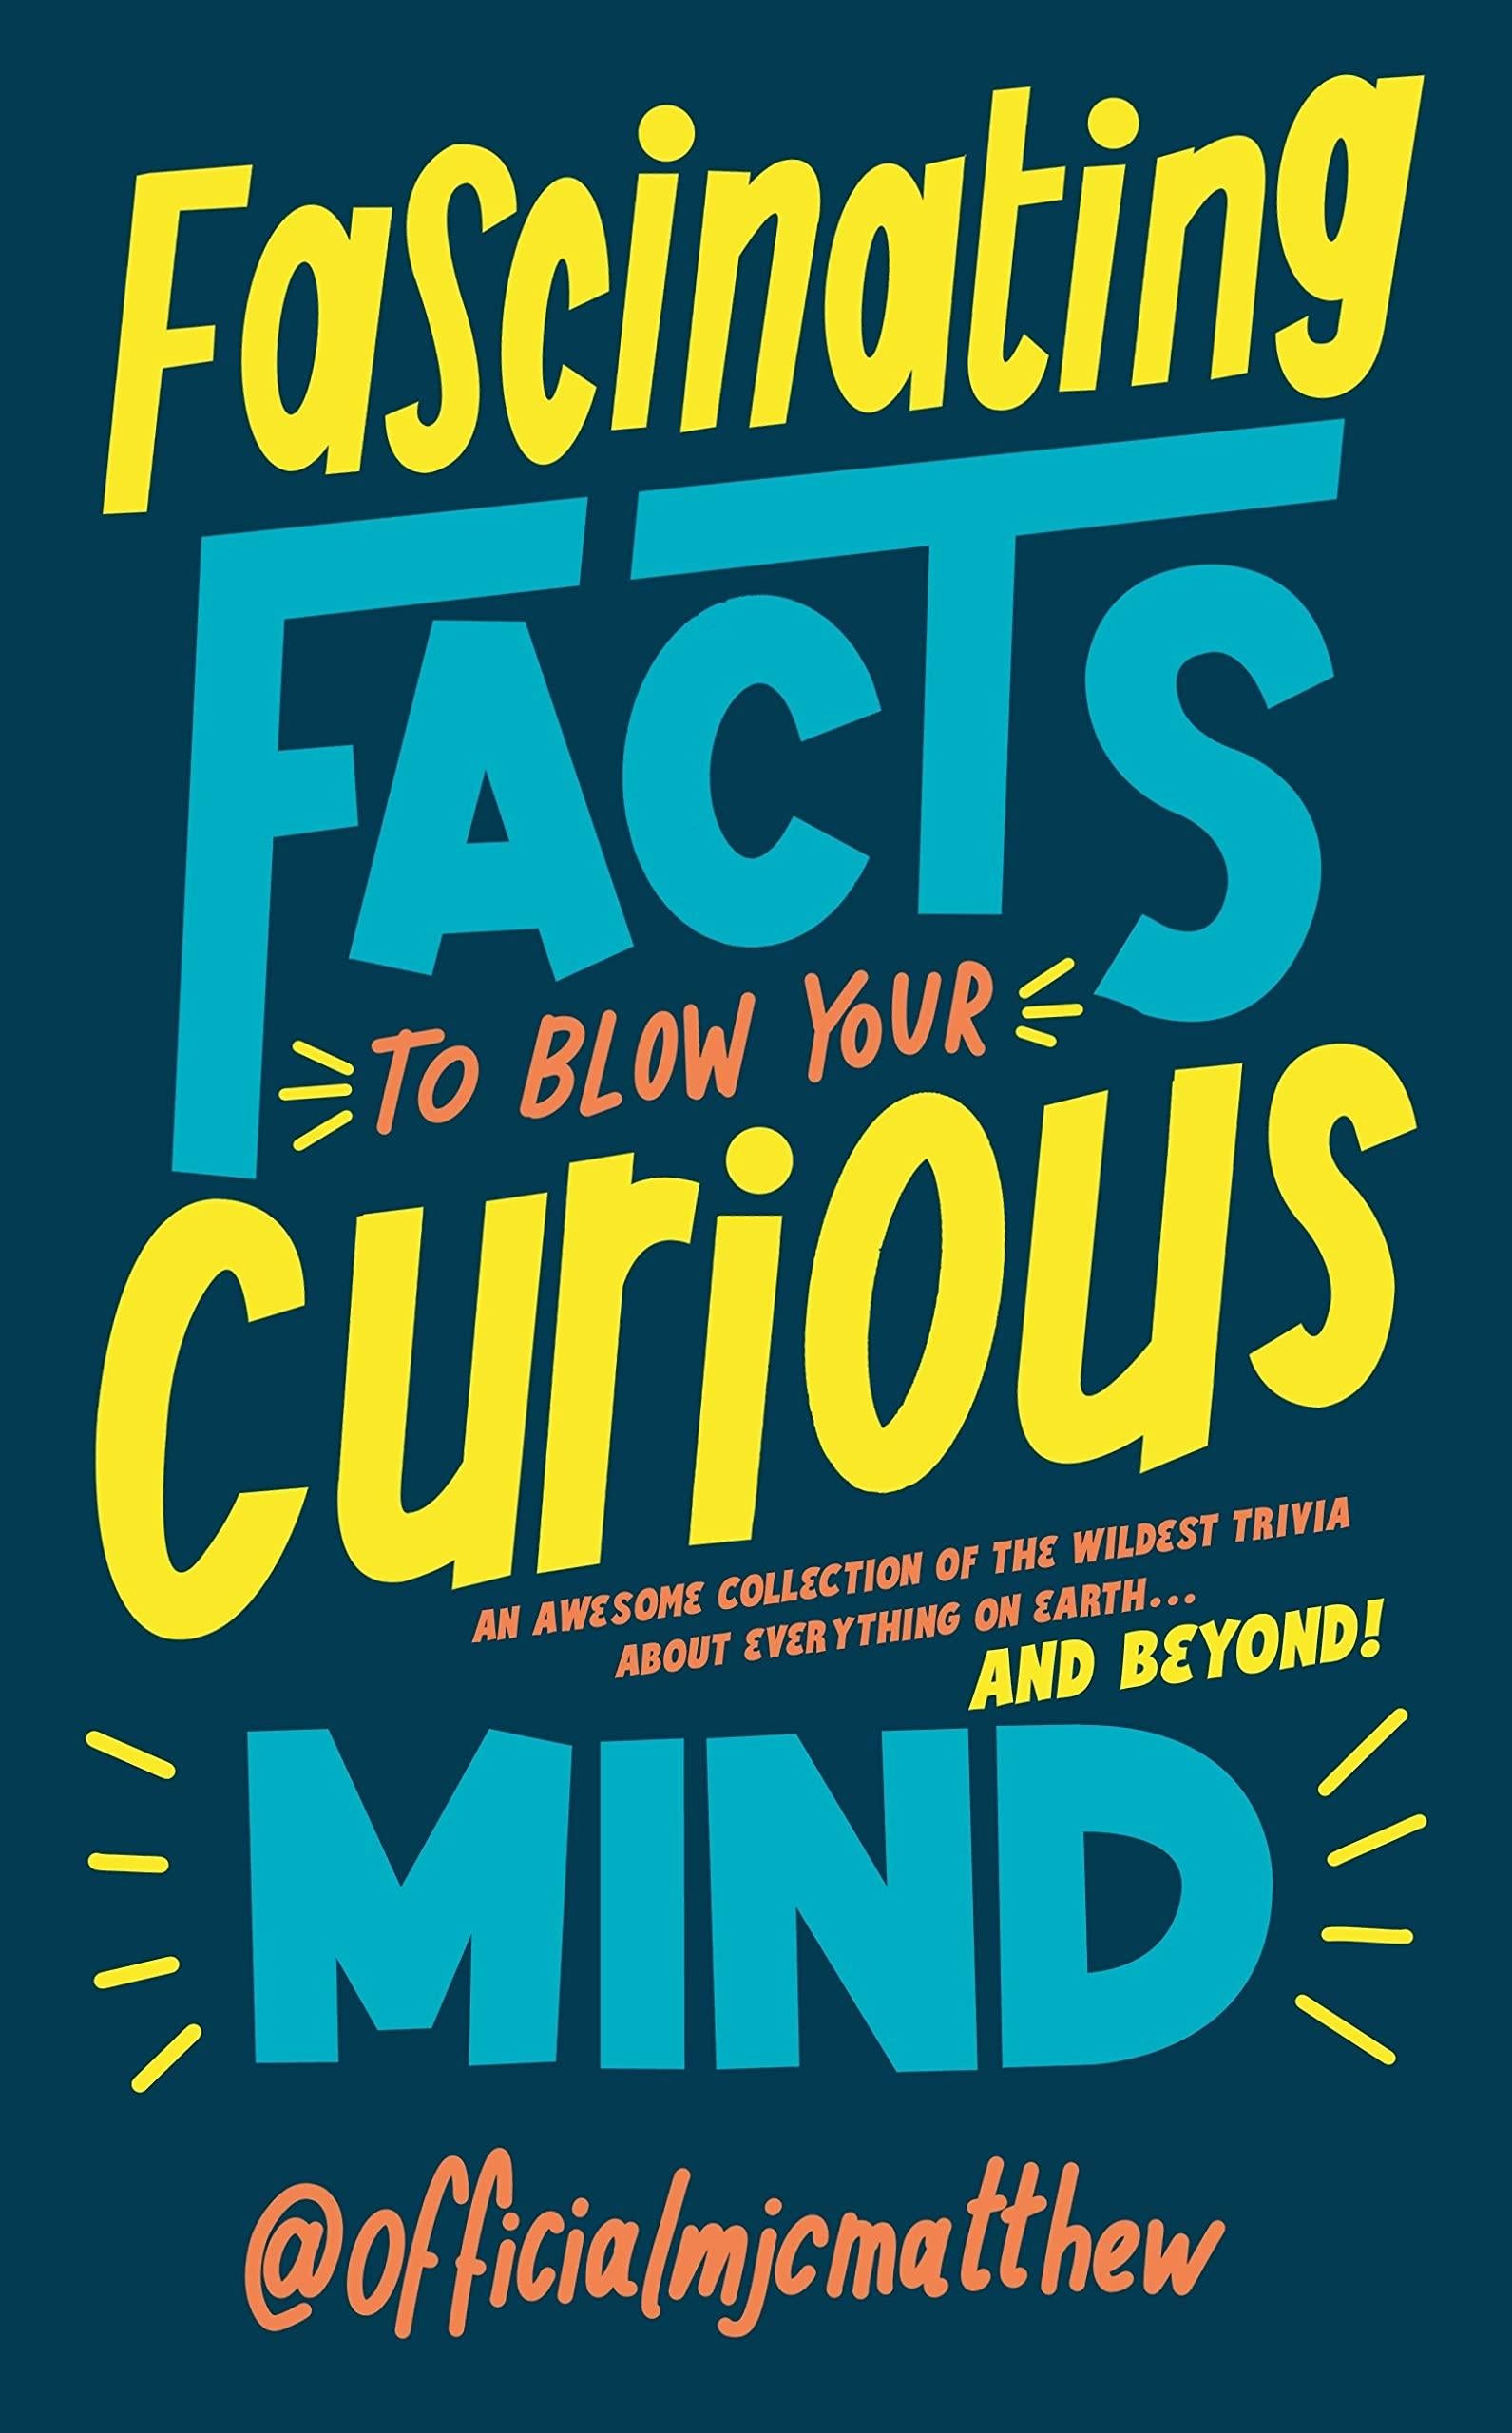 Fascinating Facts to Blow Your Curious Mind: An awesome collection of the wildest trivia about everything on Earth … and beyond!